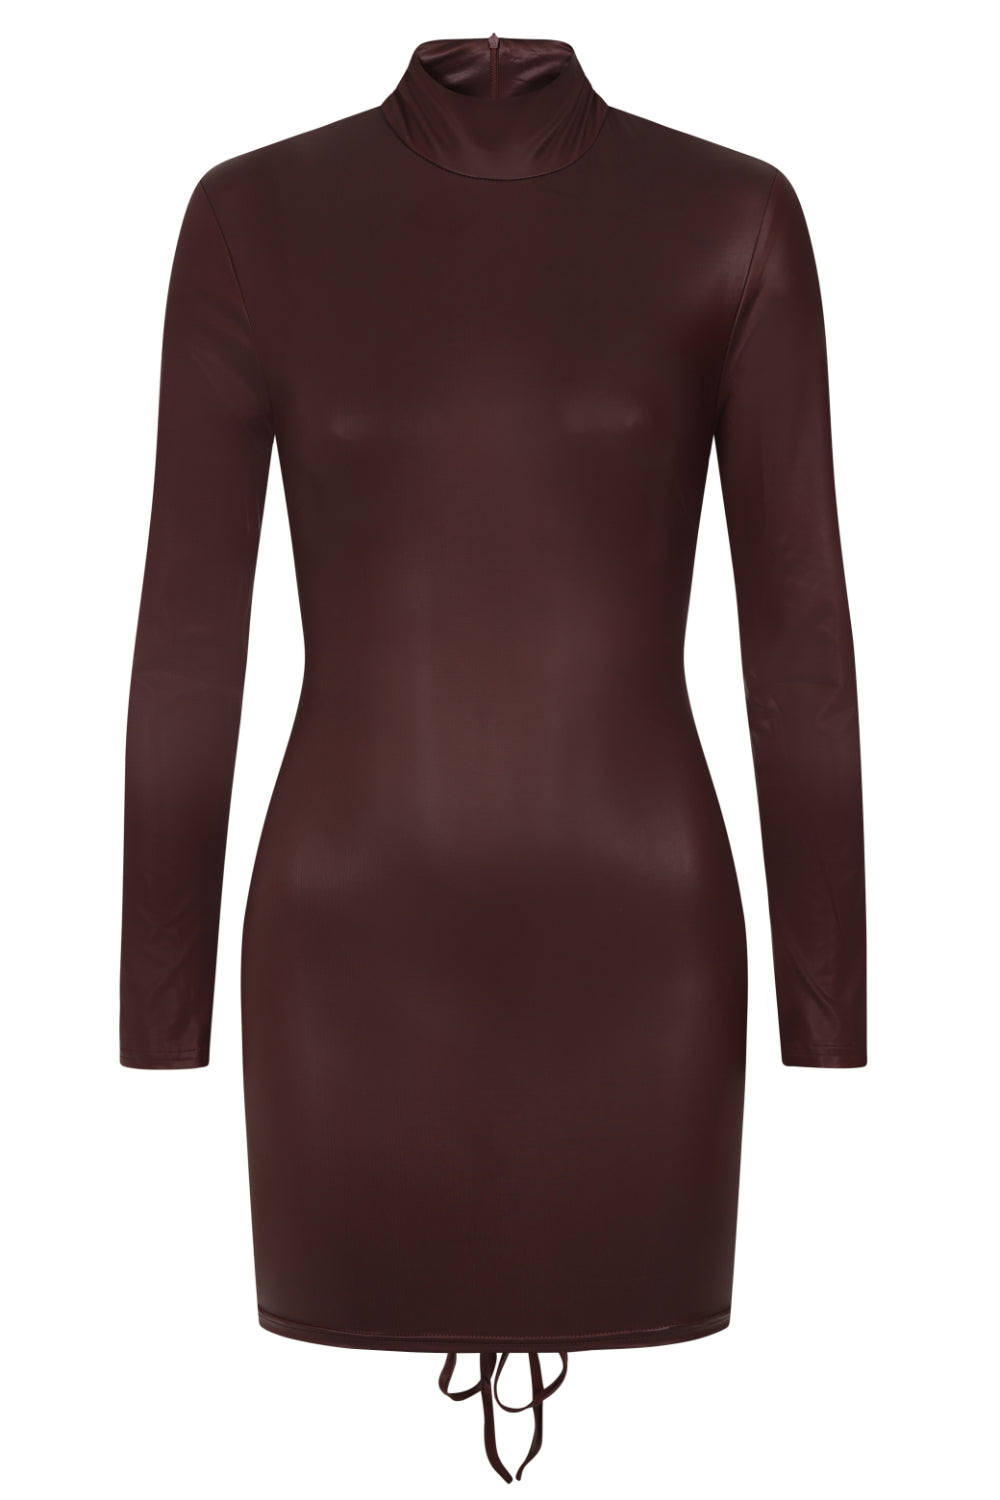 Party In The Back Bordeaux Wine Wet Look Long Sleeve Ruched Dress